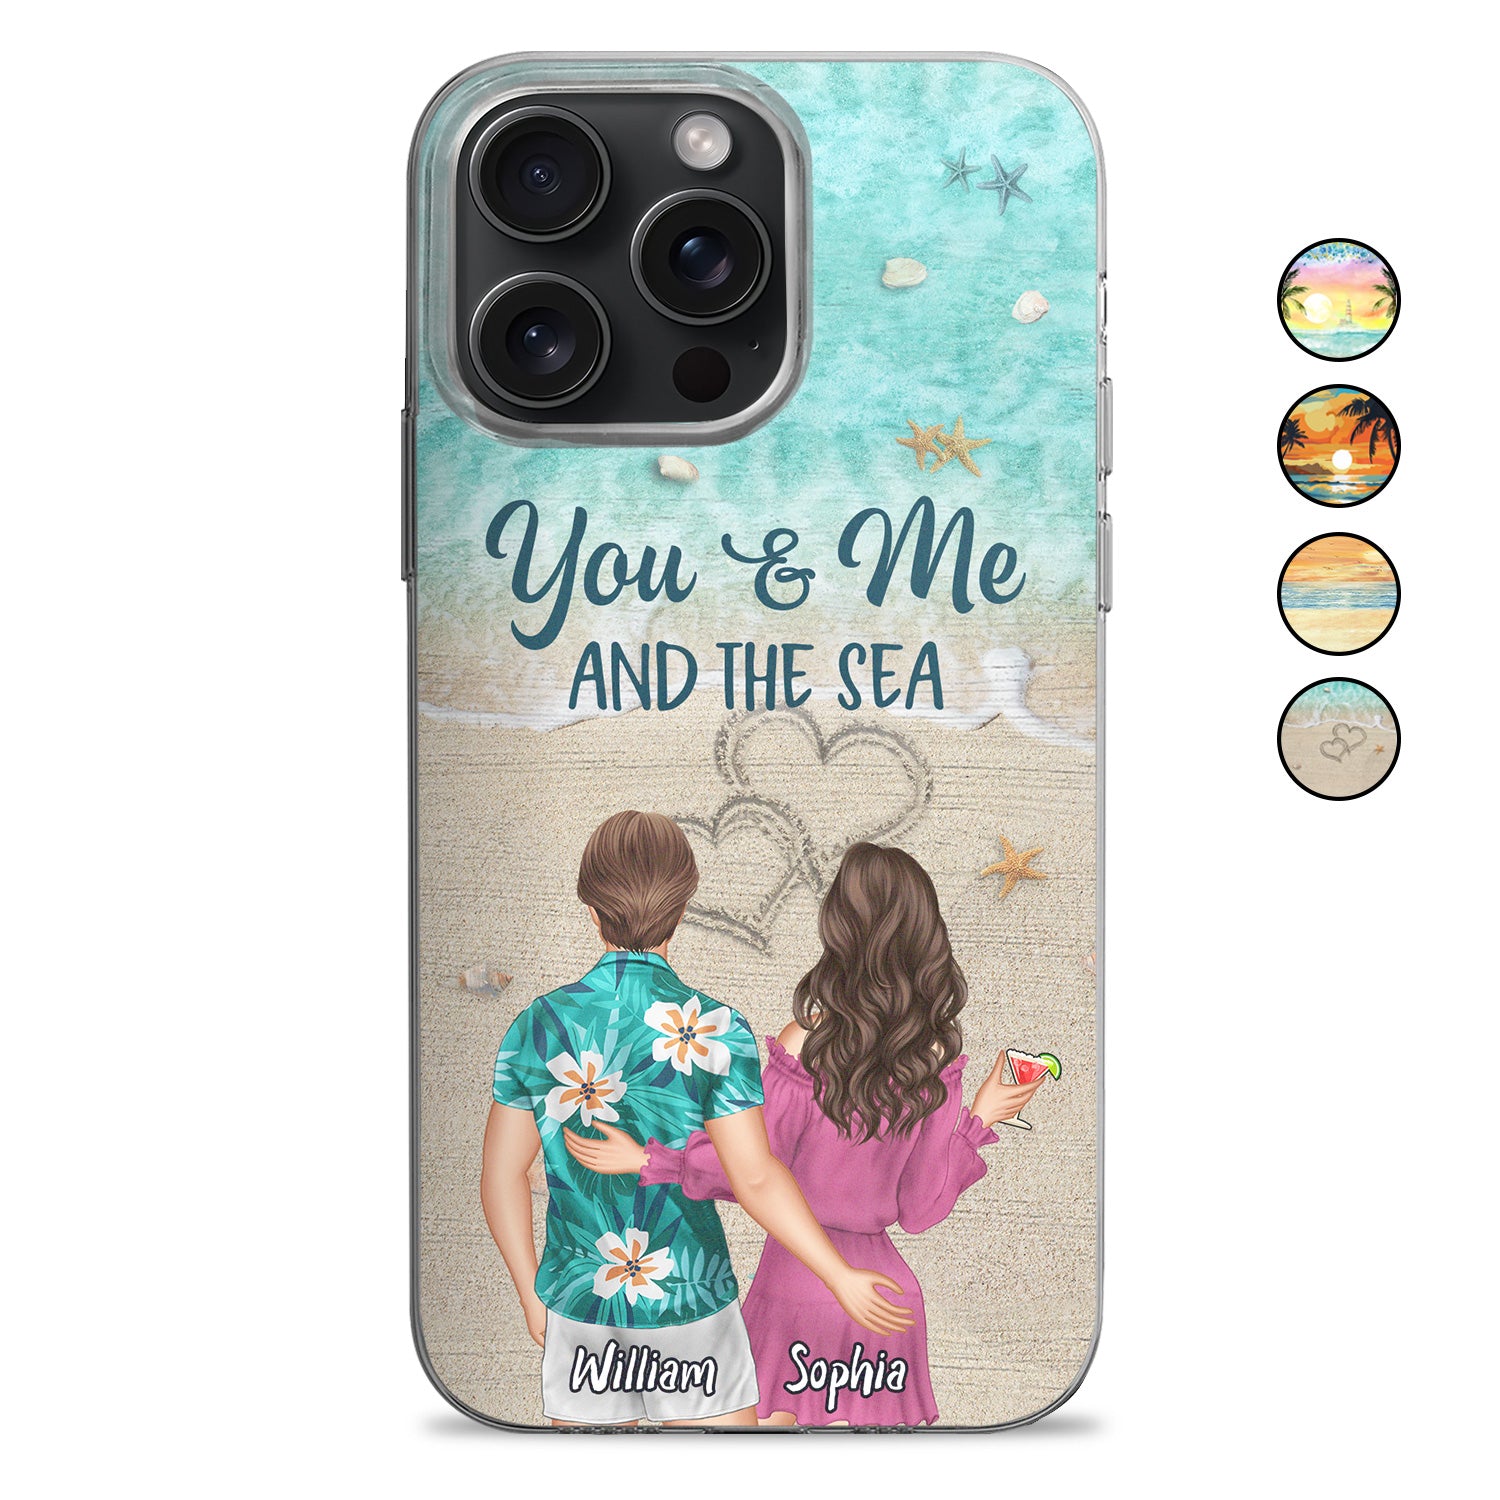 You And Me And The Sea - Anniversary, Vacation, Funny Gift For Couples, Husband, Wife - Personalized Clear Phone Case